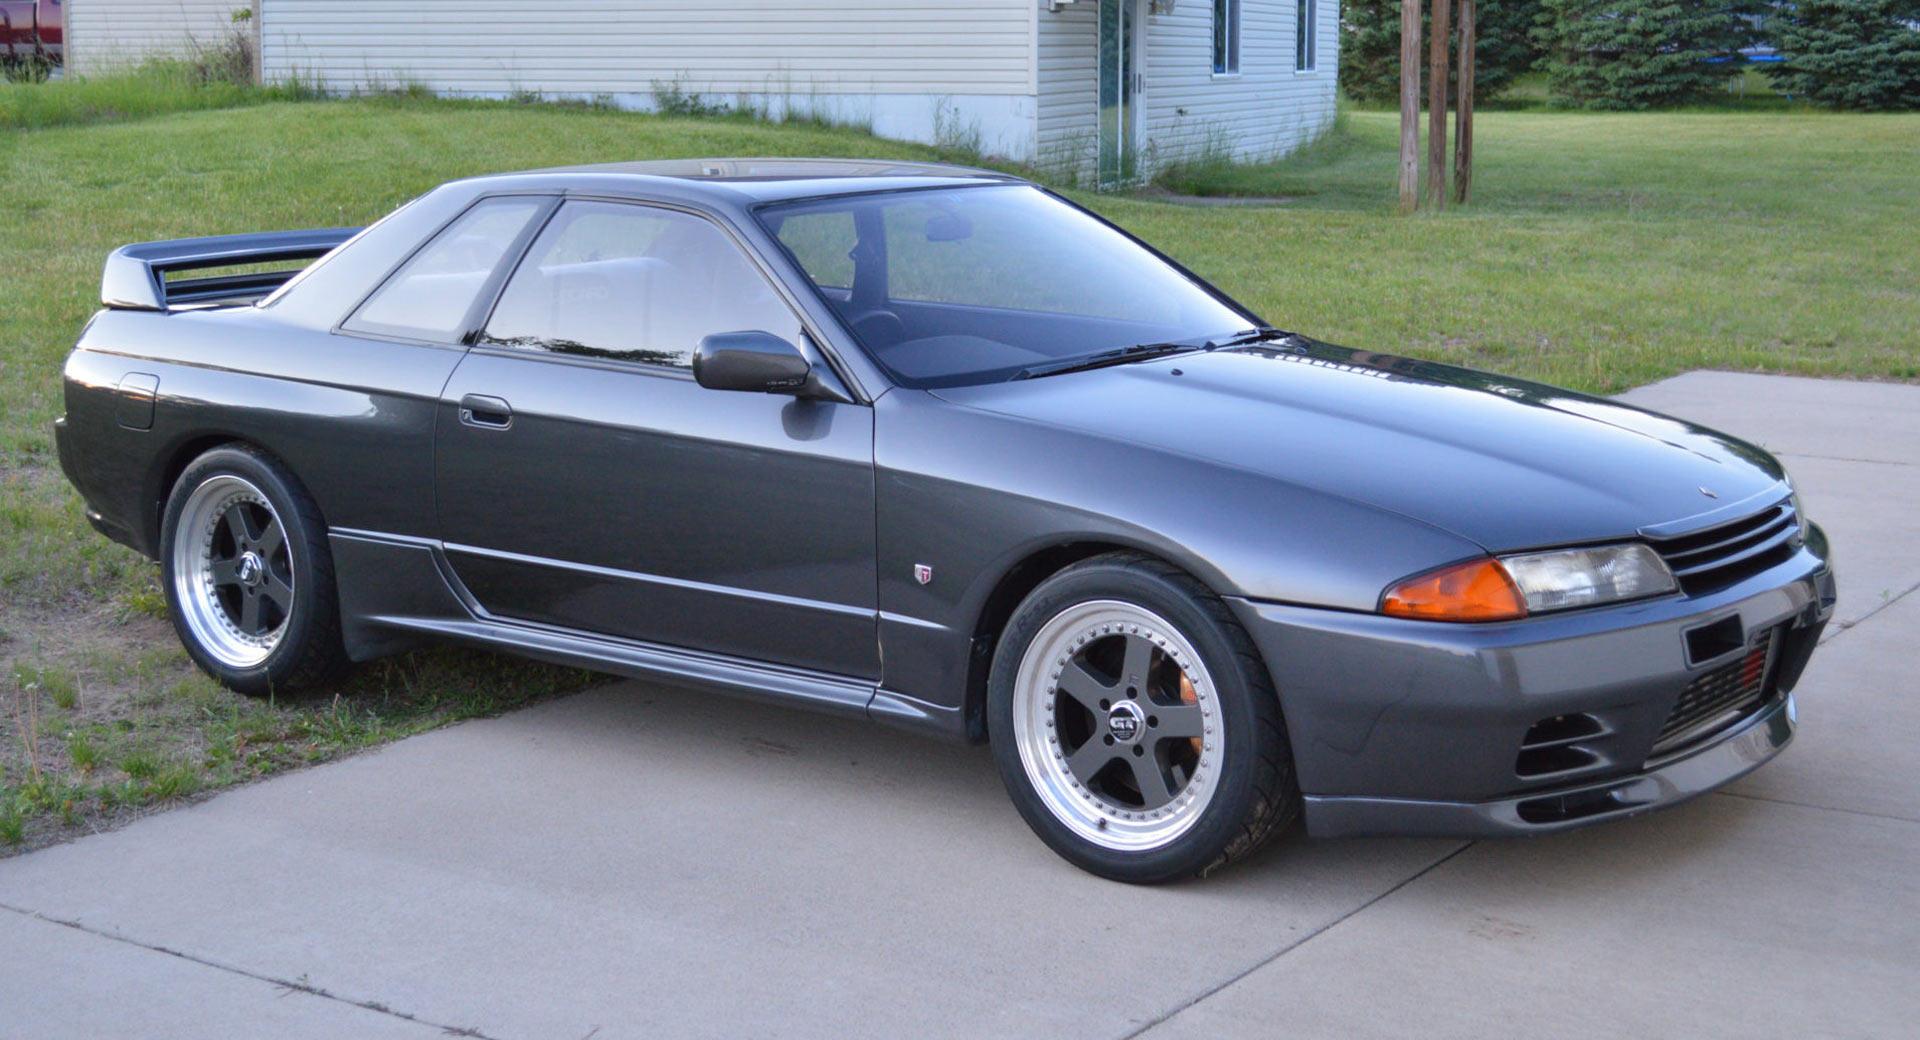 1990 Nissan Skyline GT-R Nismo Edition Is A True Rarity In The